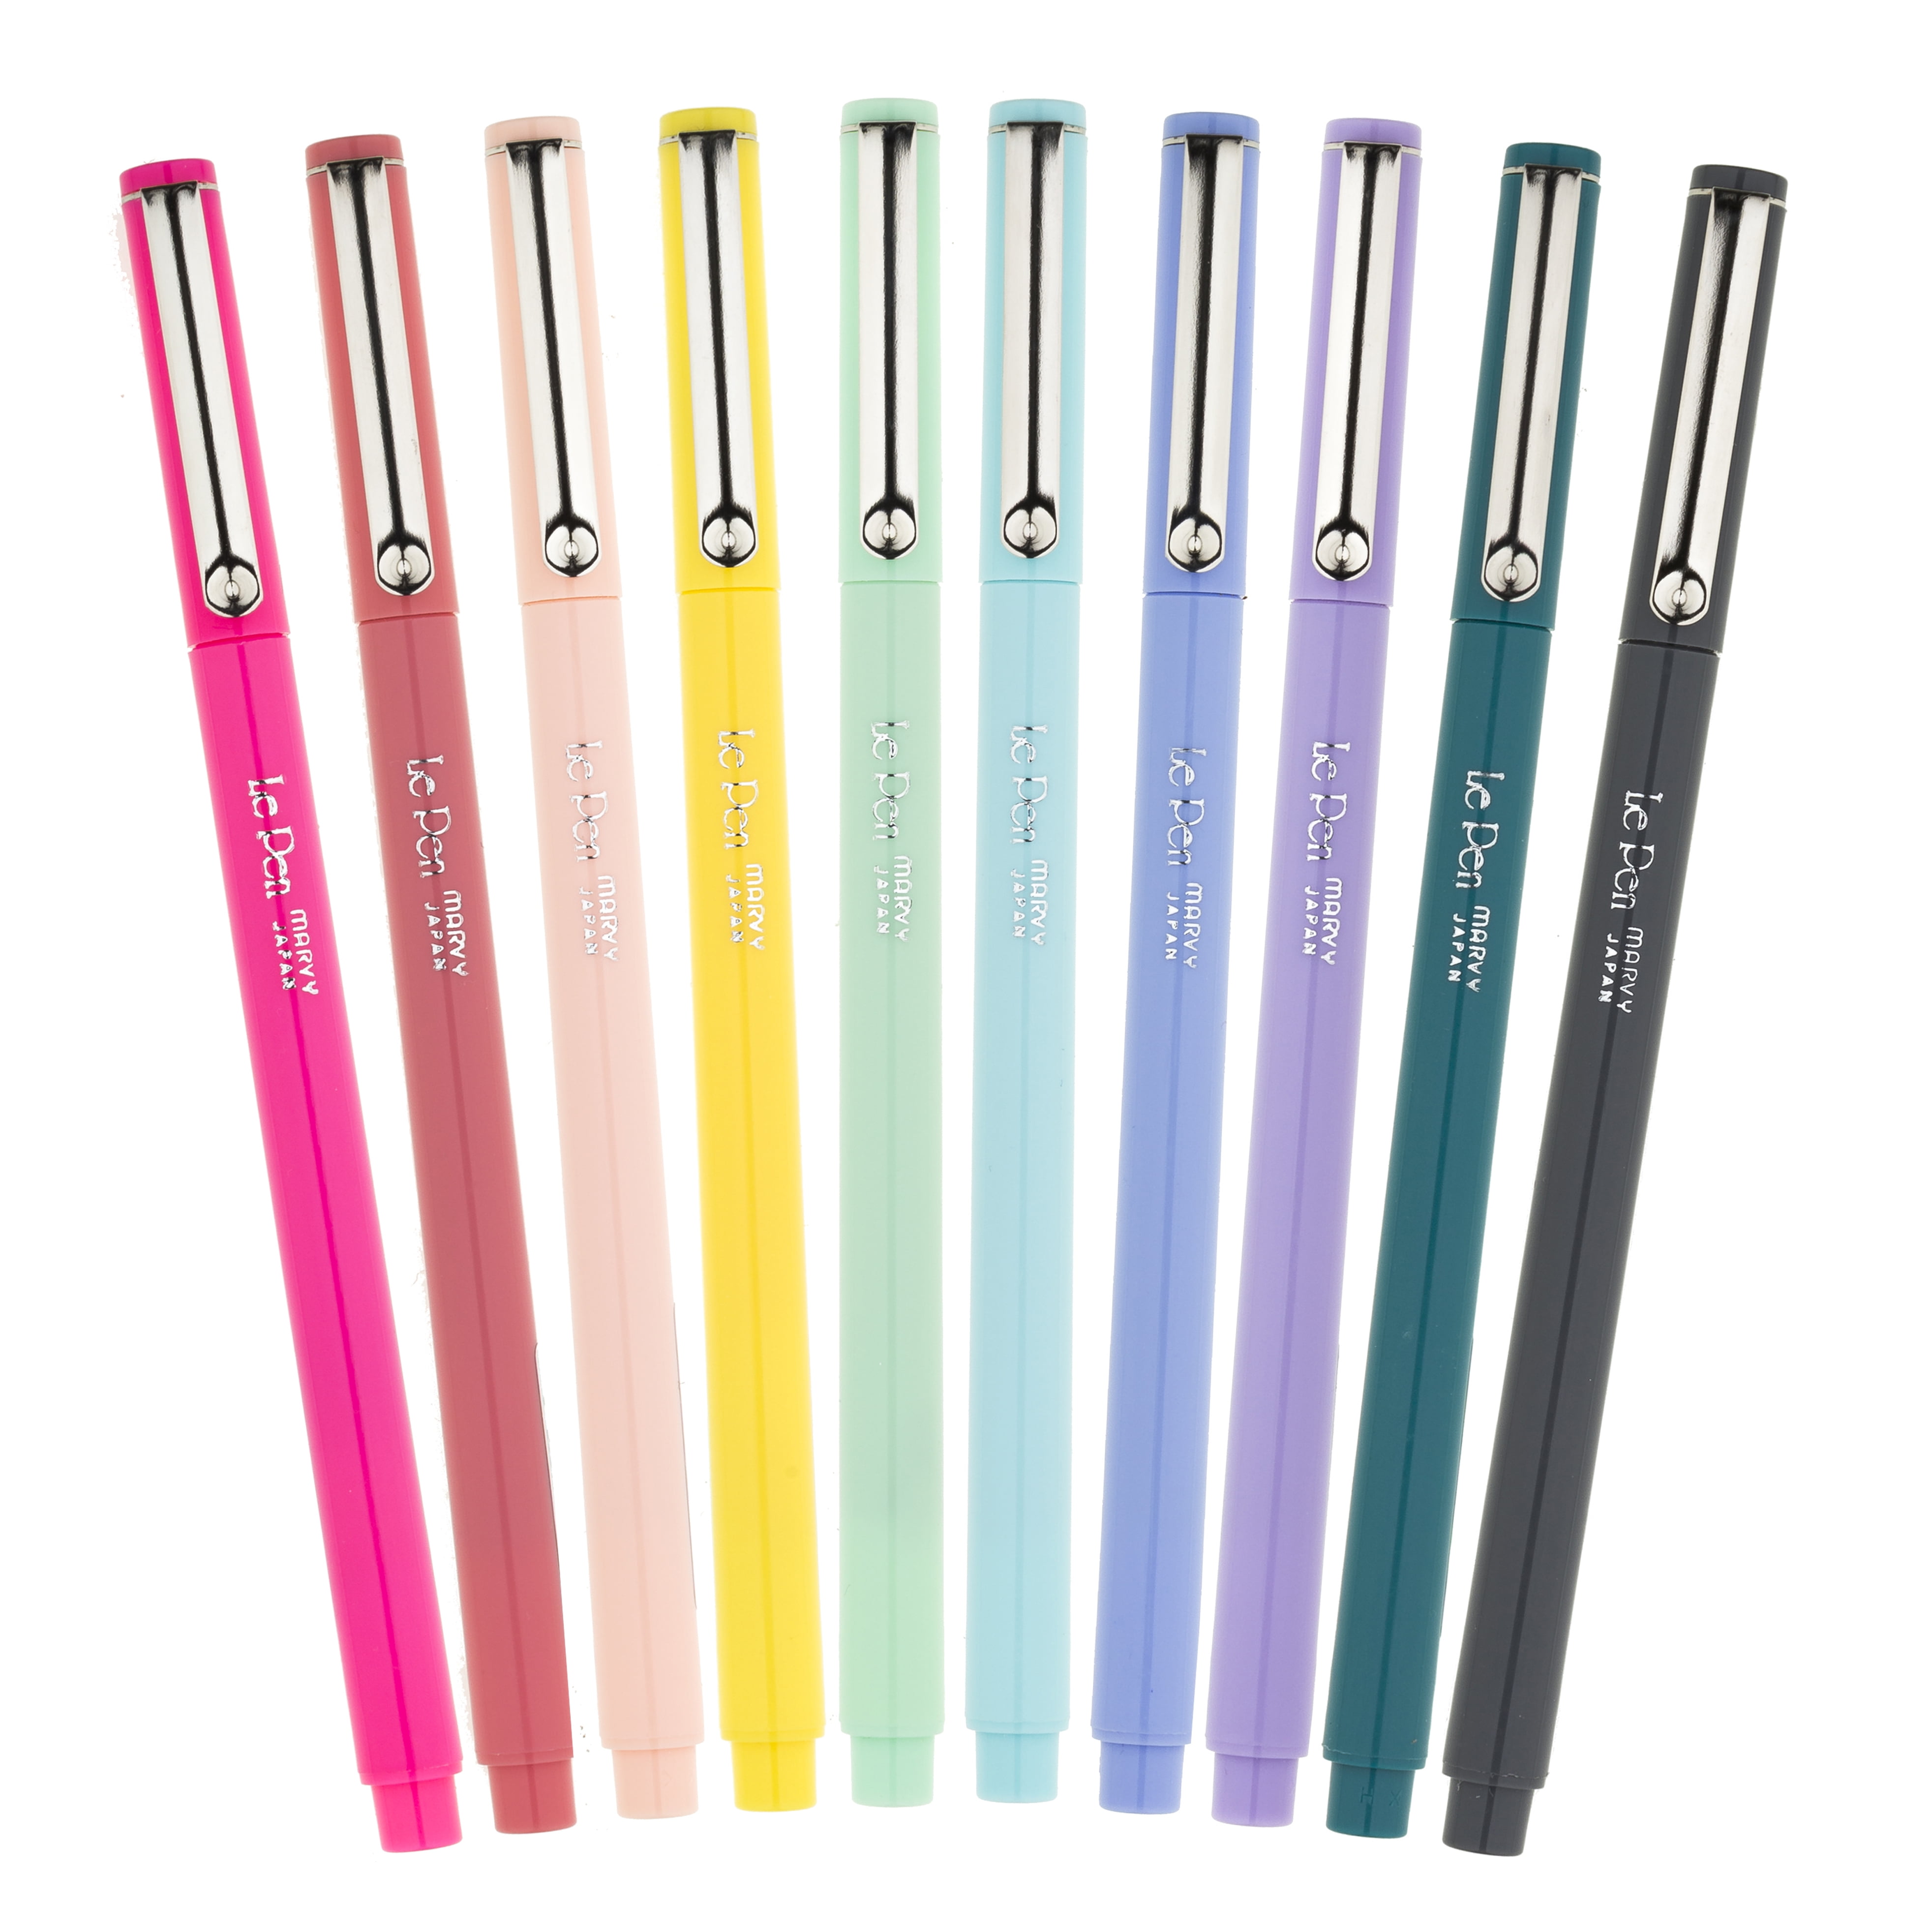 Marvy Le Pen, 0.3 mm Micro Fine Tip, Assorted Colors, Pack of 10 - 1401871